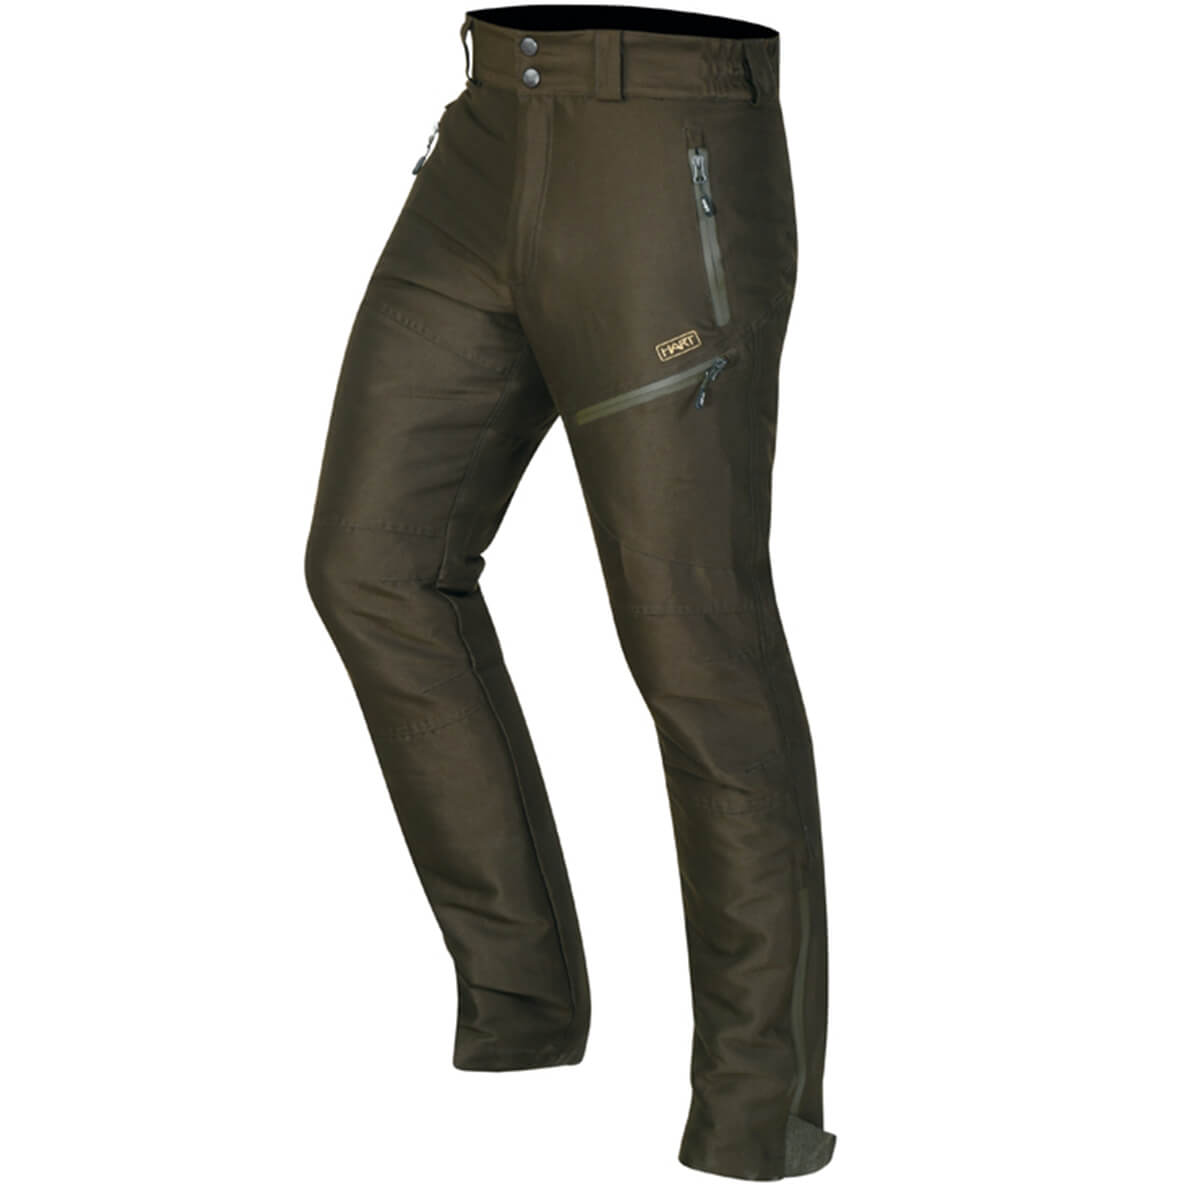 Hart winter trousers Altai-T - Winter Hunting Clothing